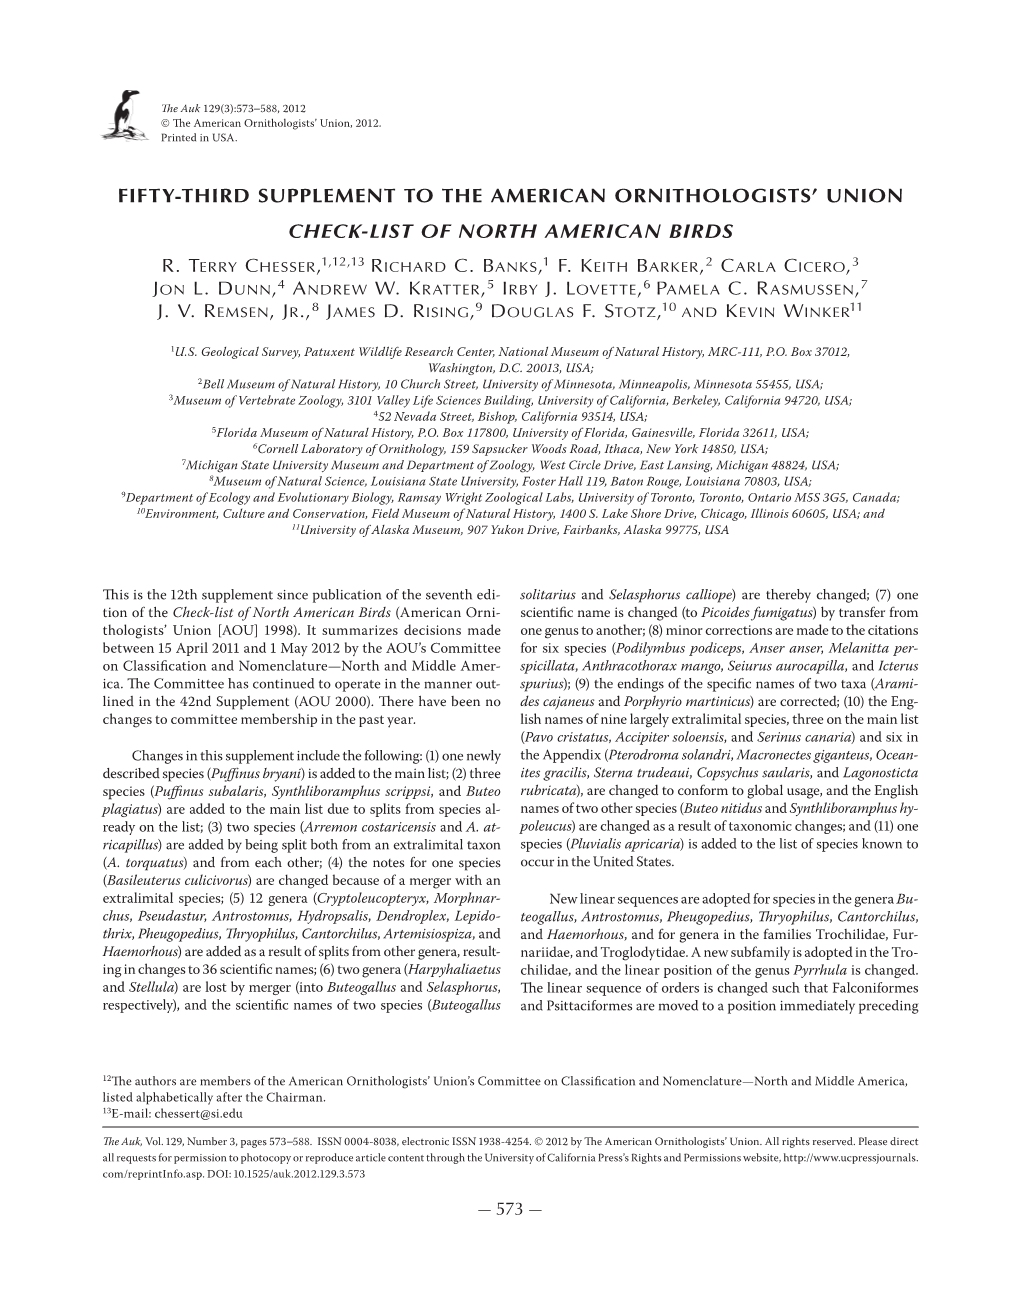 Fifty-Third Supplement to the American Ornithologists' Union Check-List of North American Birds